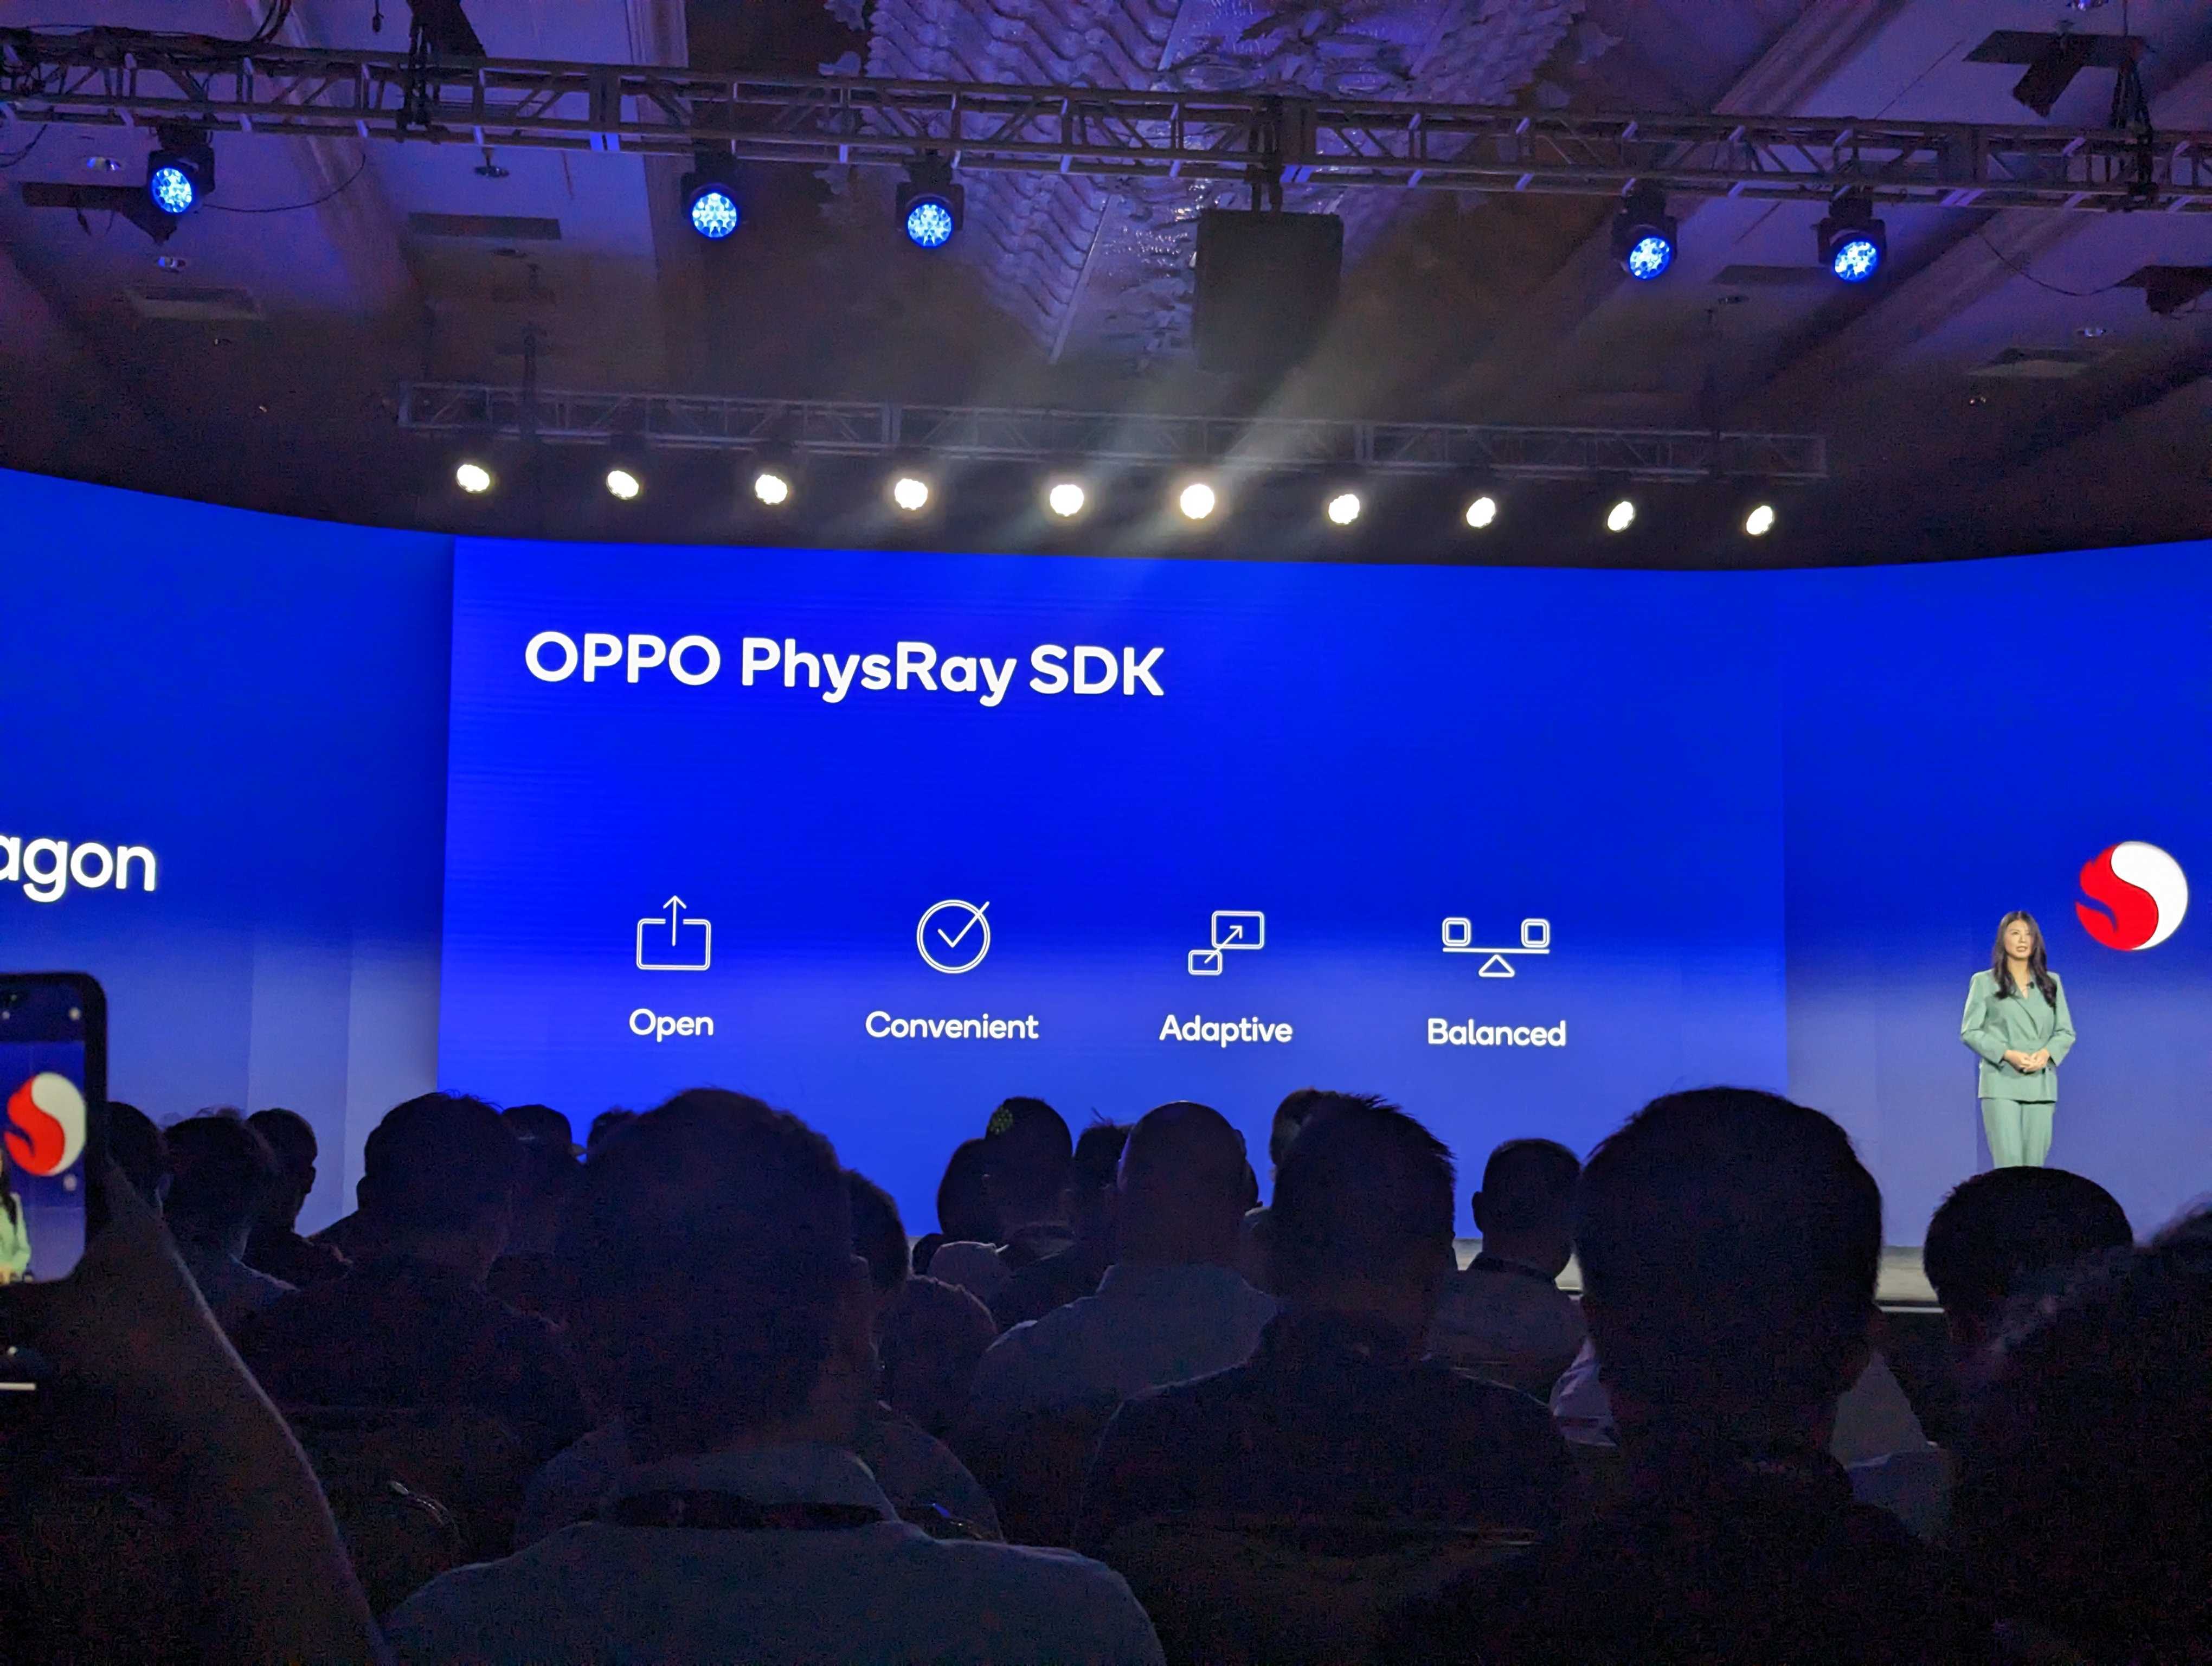 Oppo's Jane Tian on stage at the Qualcomm Snapdragon Summit 2022, talking about the PhysRay SDK